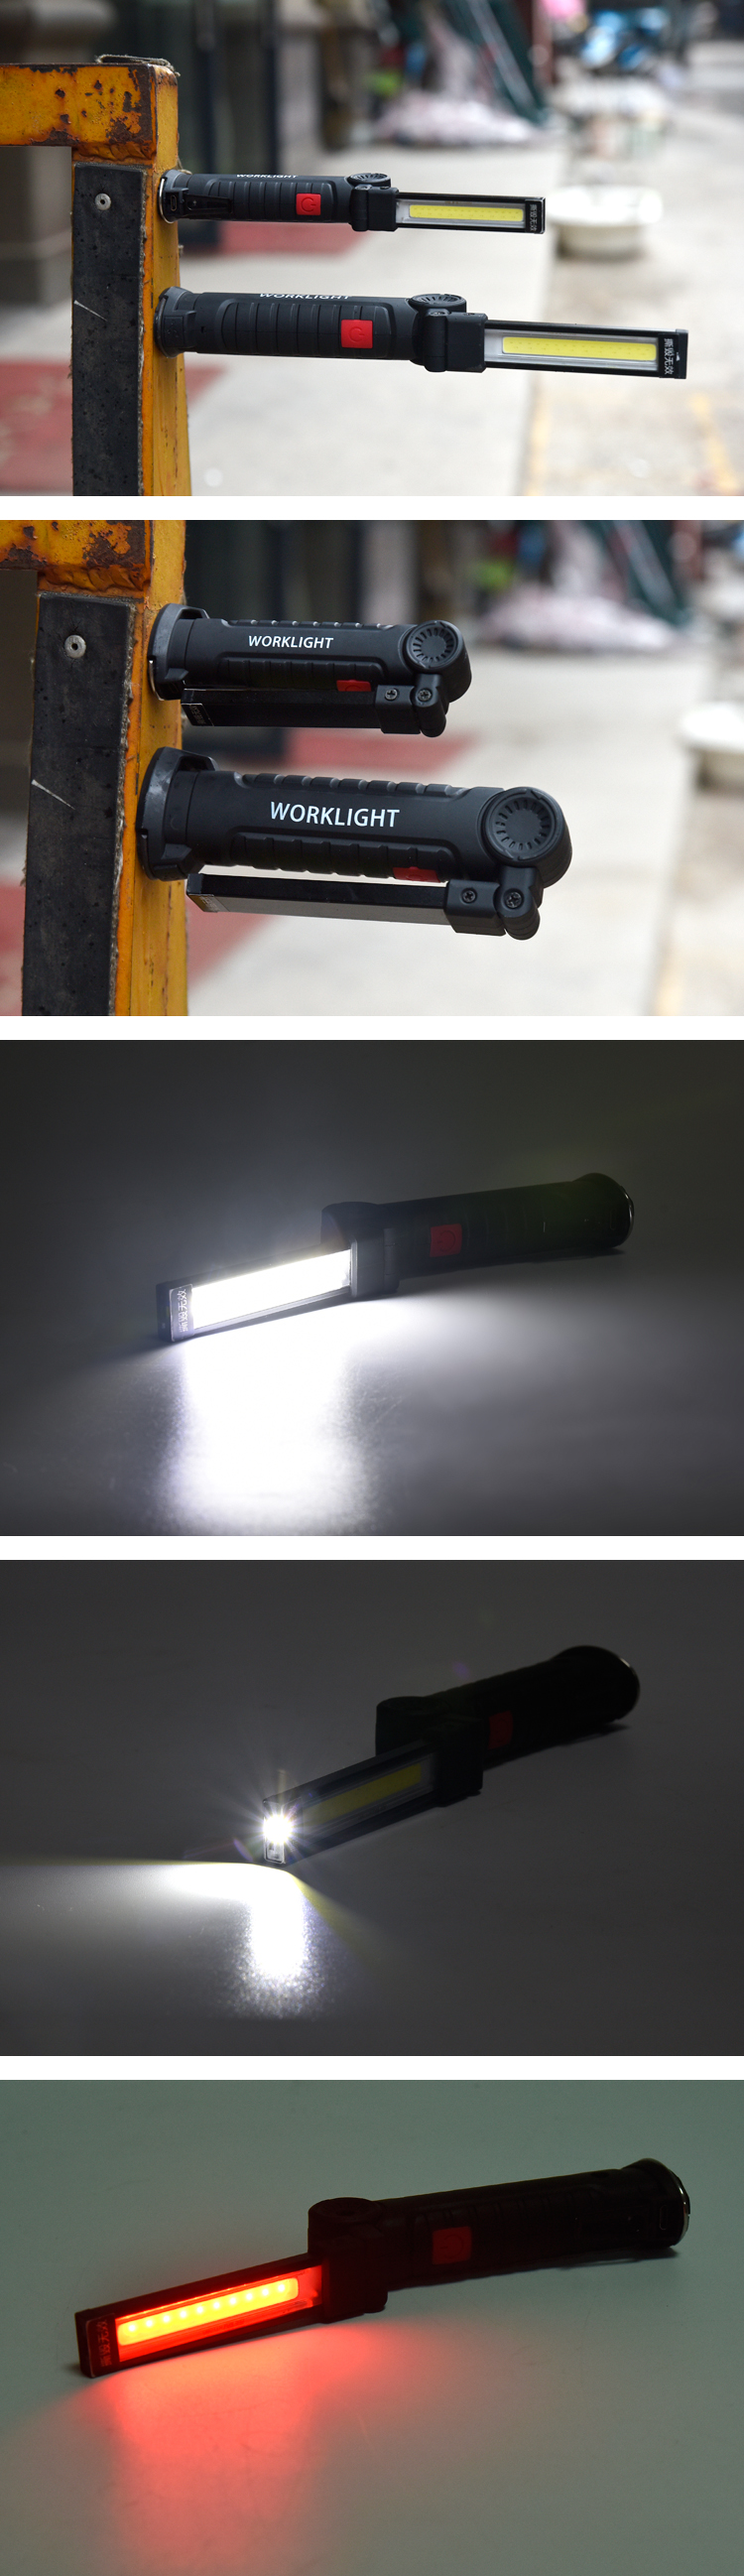 XANES-175B-360Degree-Rotation-USB-Rechargeable-COBLED-Emergency-Worklight-with-Magnetic-Tail-Flashli-1214650